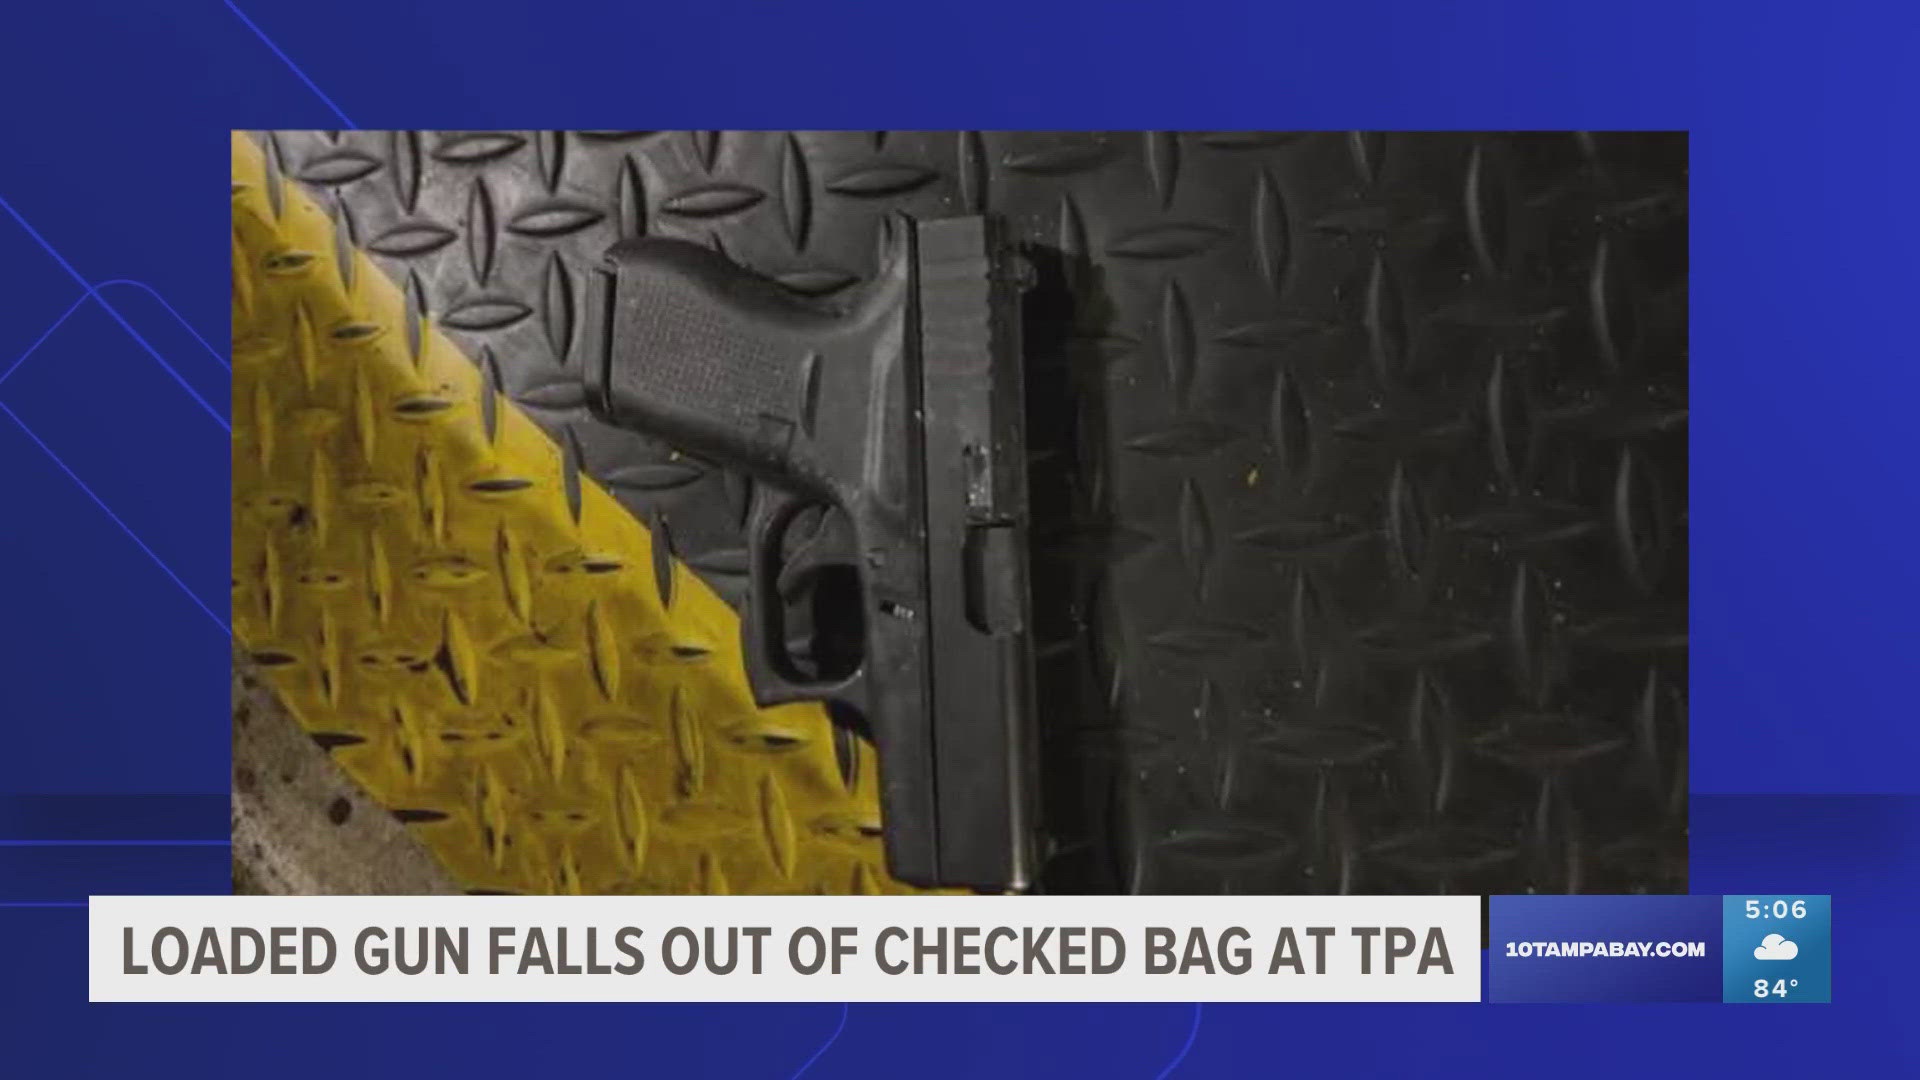 For more information on how to properly store guns when flying, find this story on 10TampaBay.com